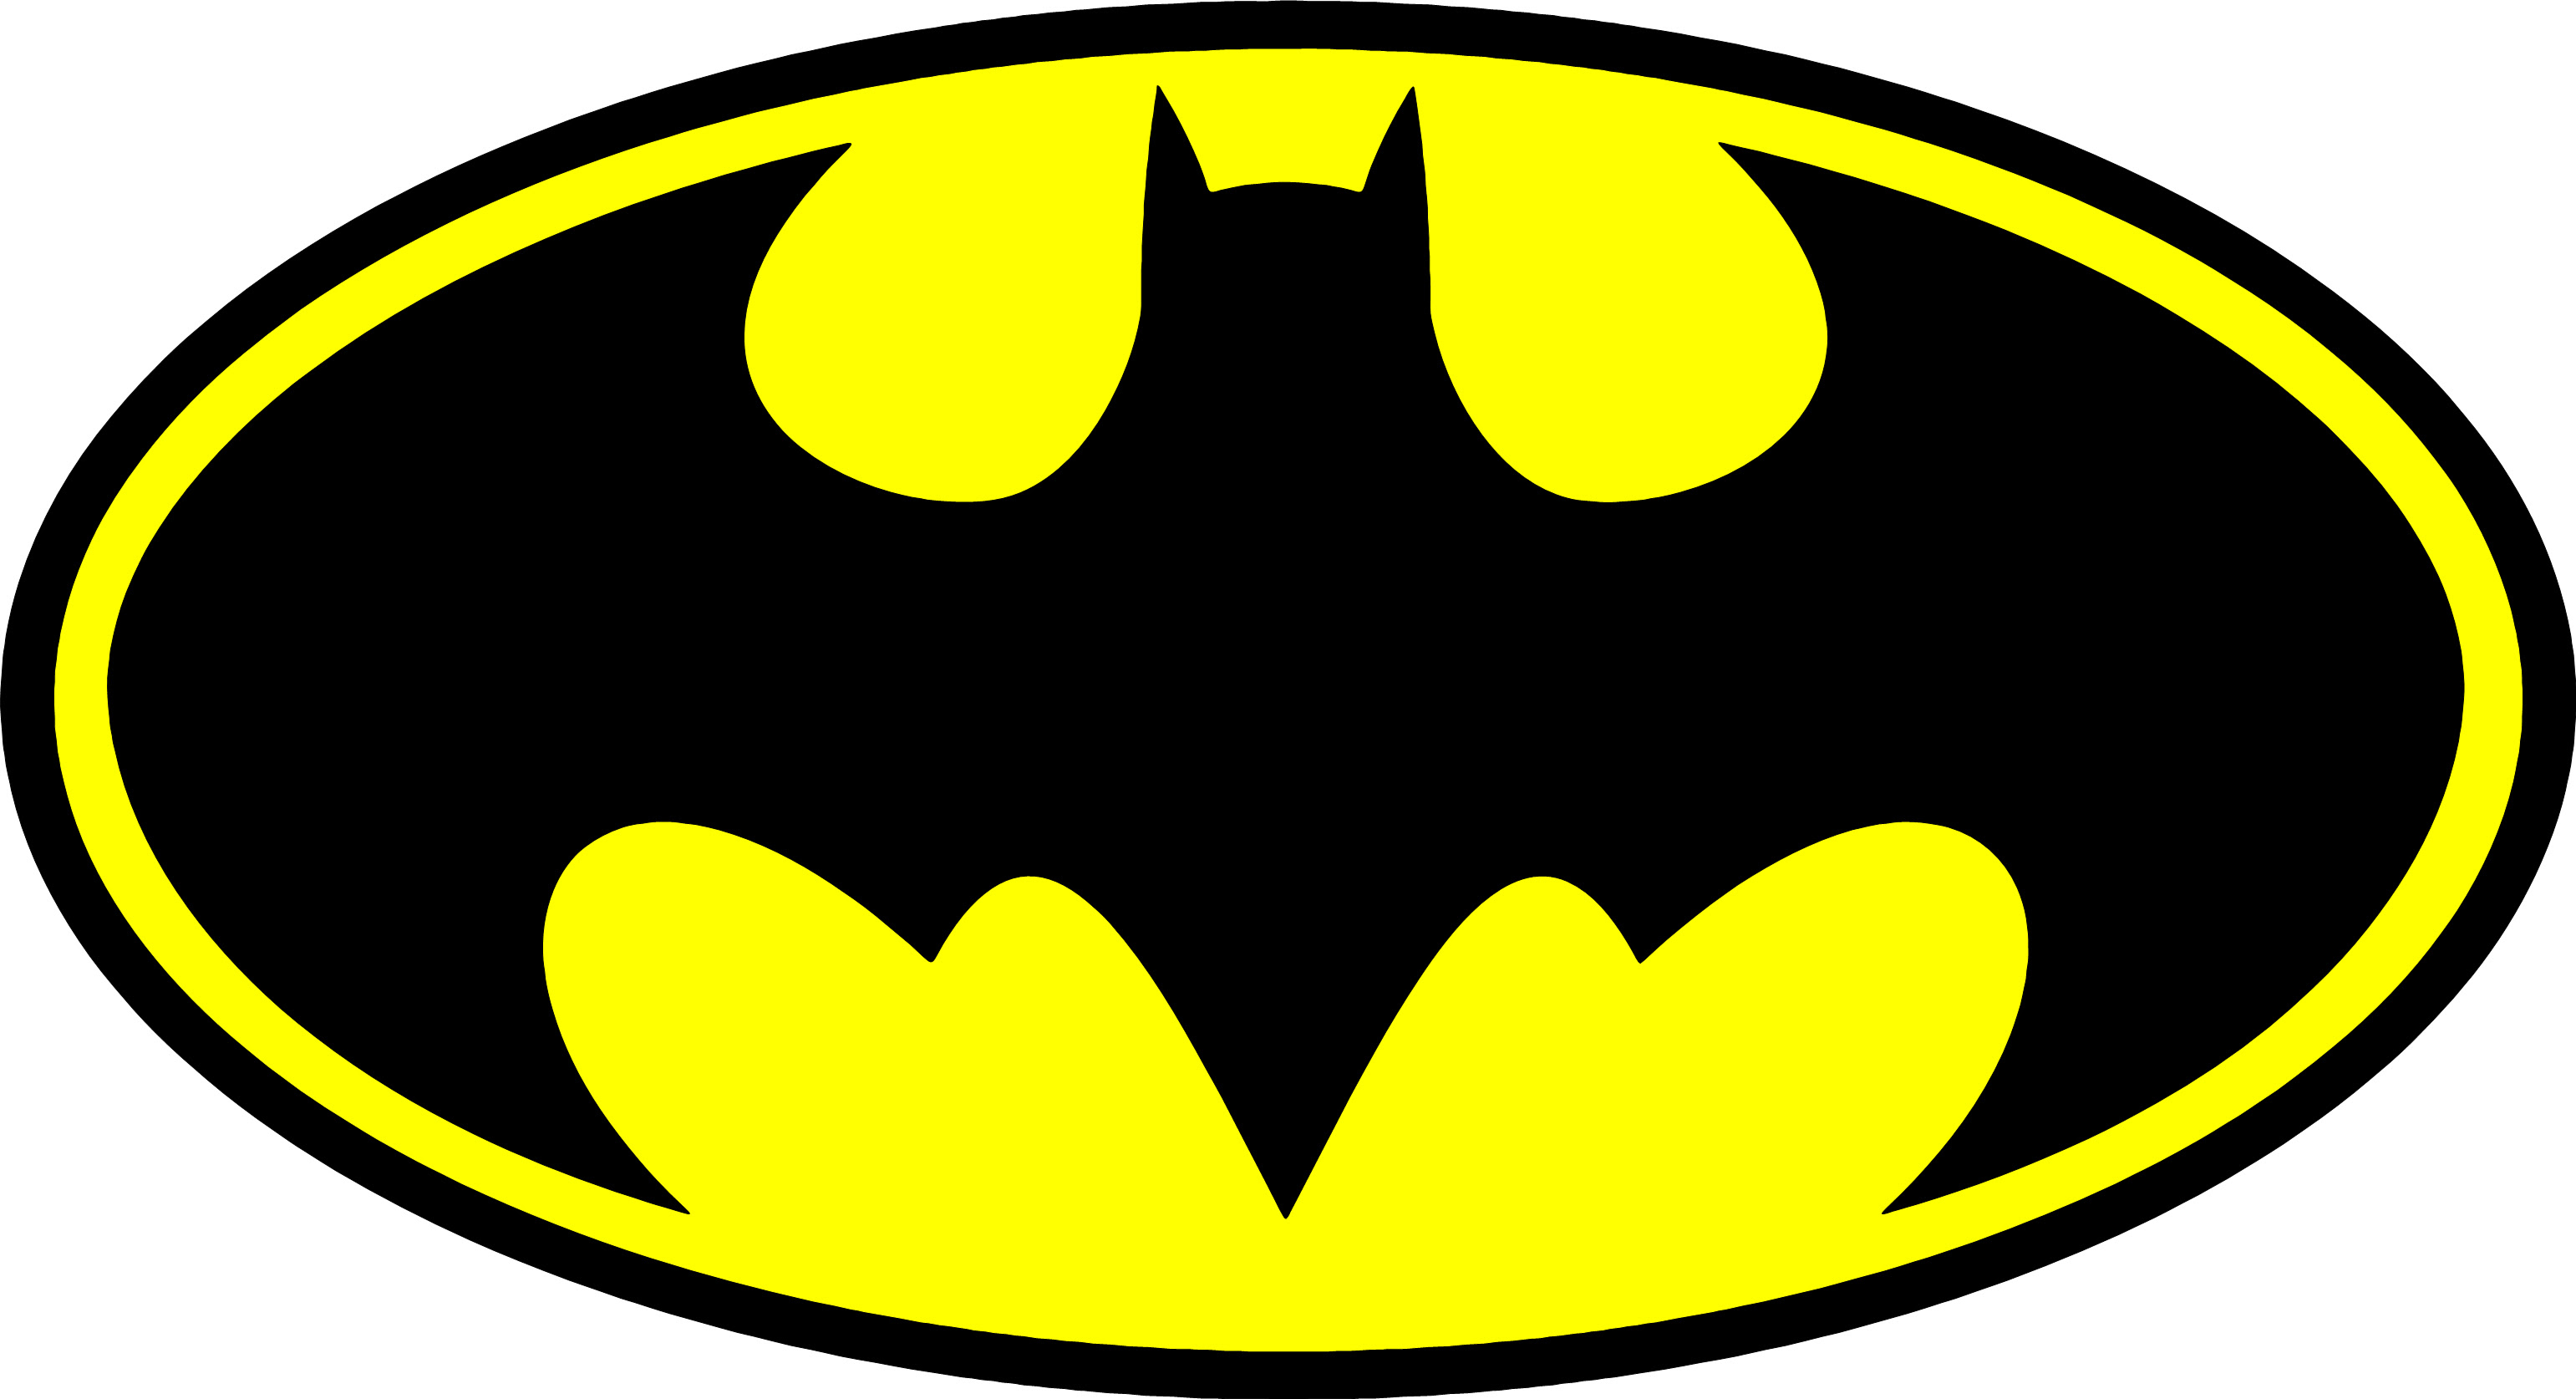 Now You Can Have Your Batman Logo Template Done Safely | Boory